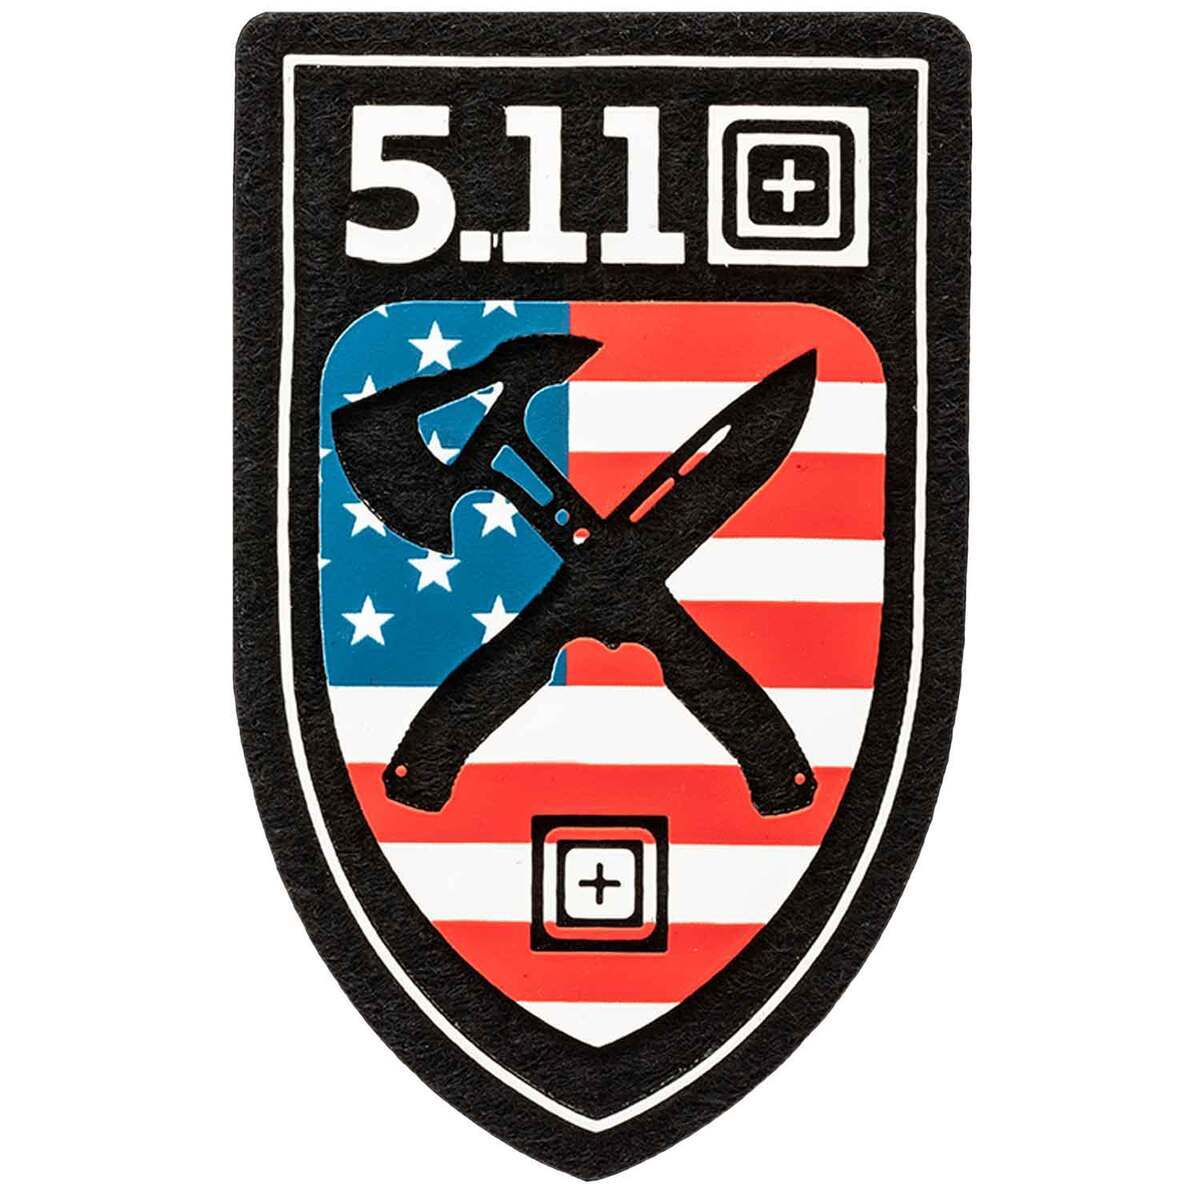 Come & Take It Black Out Patch - Tactical Patches for 5.11® Gear